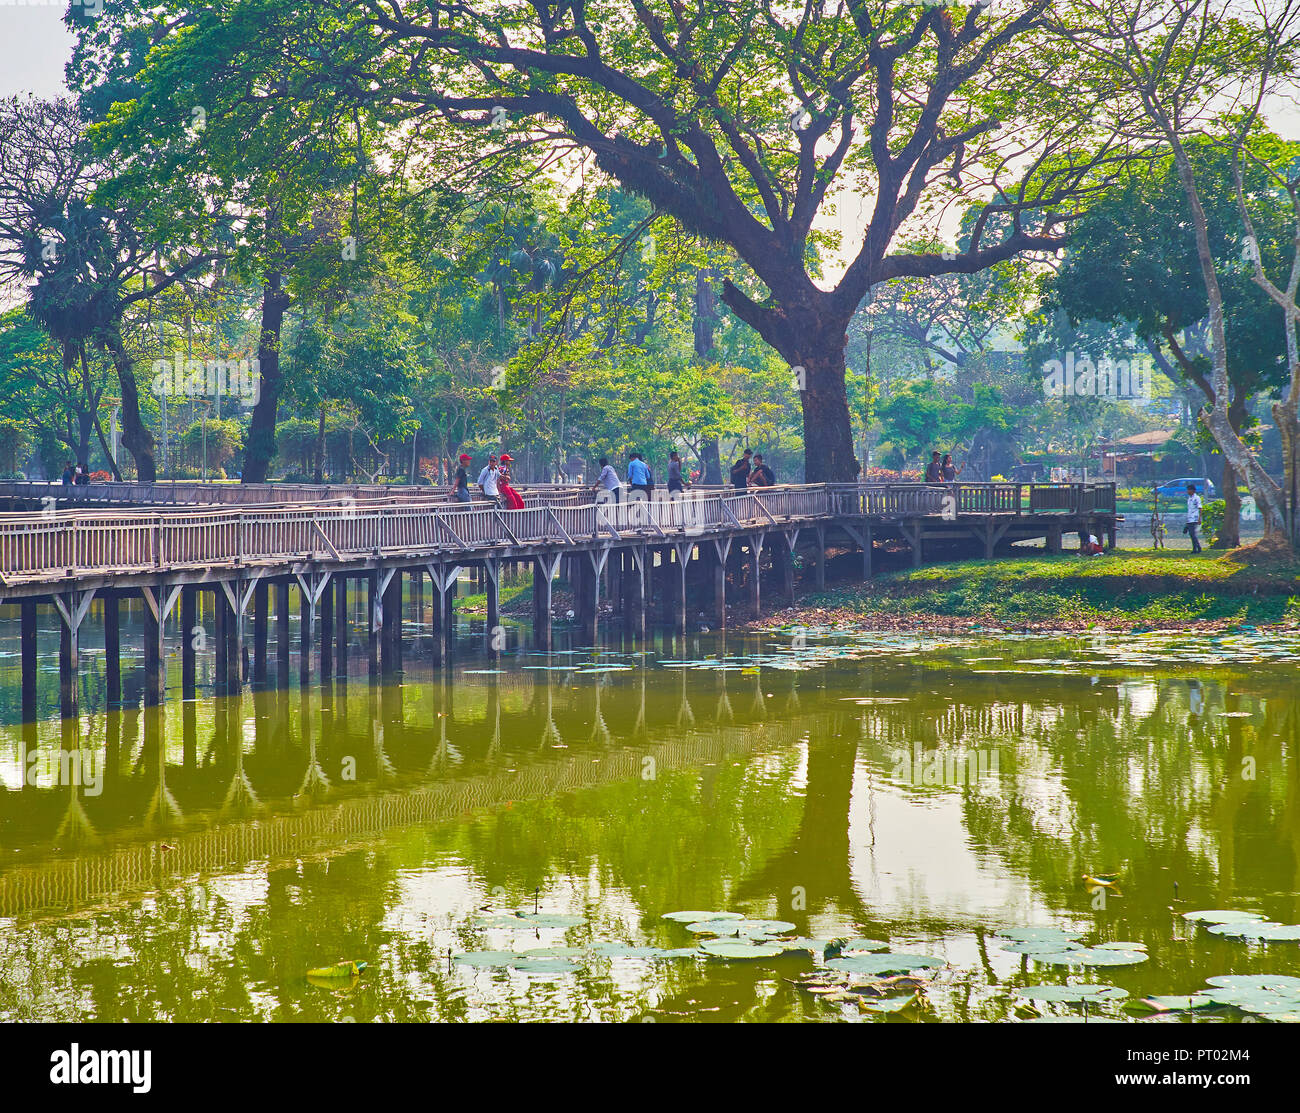 YANGON, MYANMAR - FEBRUARY 27, 2018: The pleasant daily walk along embankment of Kandawgyi Lake with a view on the old timber bridge and sprawling hta Stock Photo